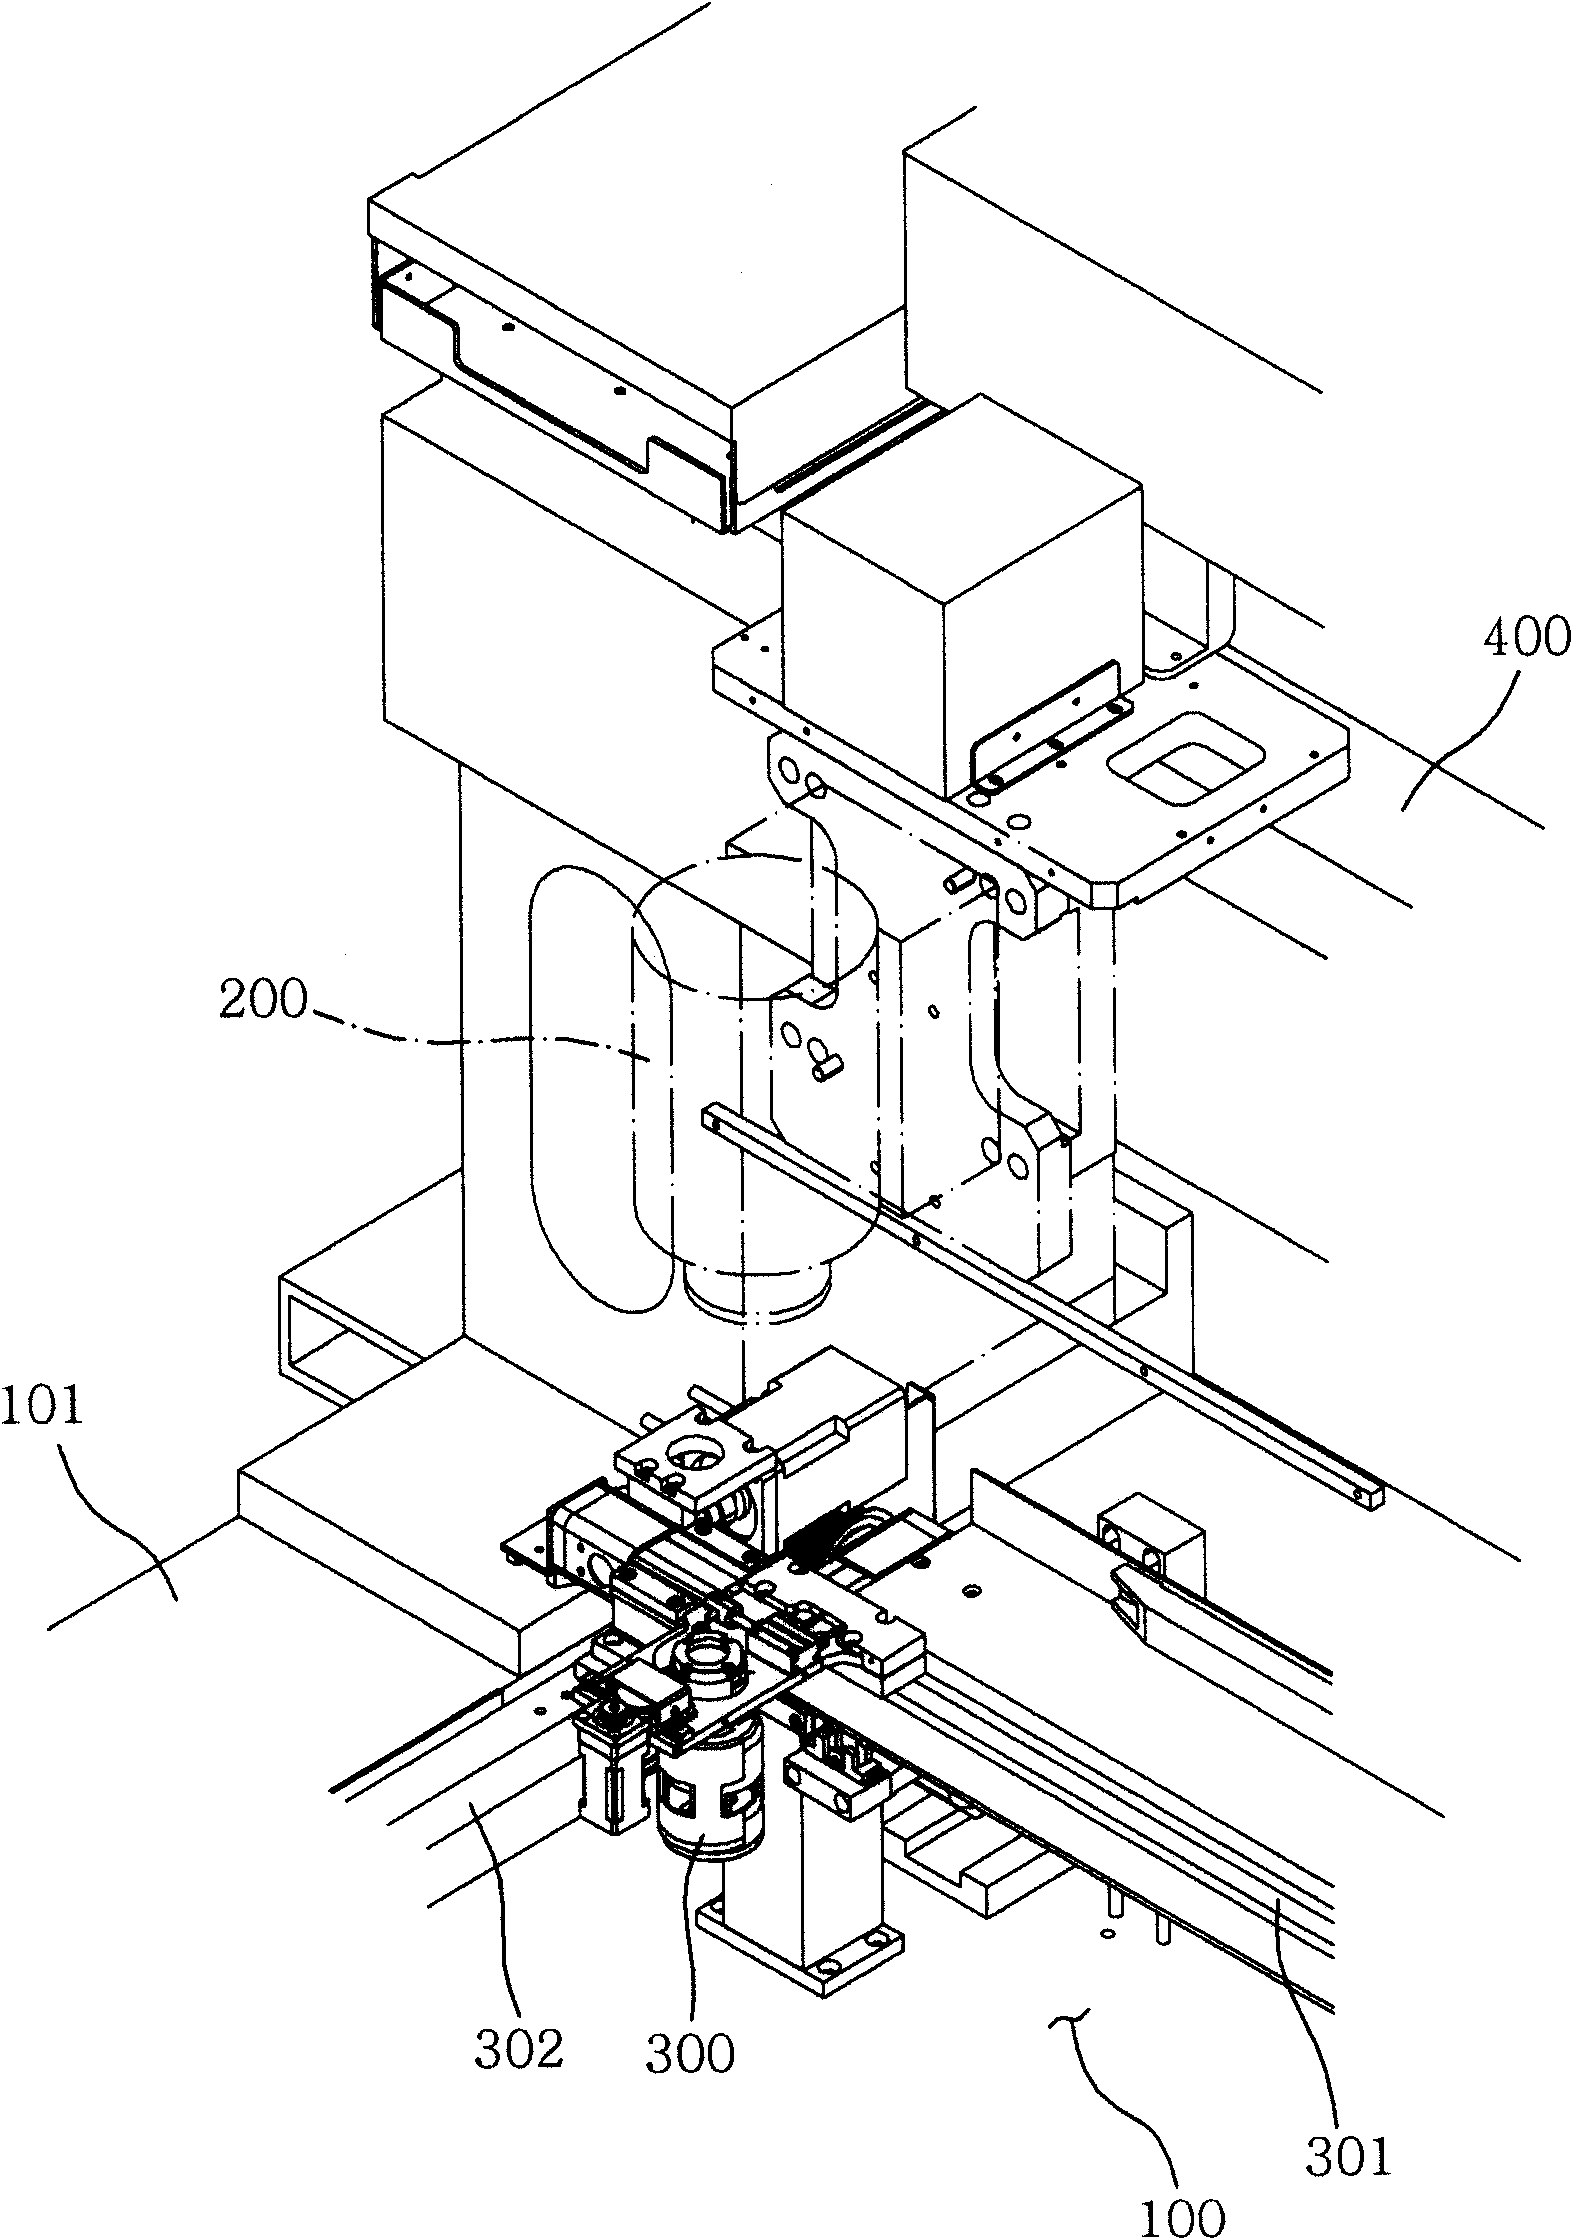 Microcosmic checking device for glass panel